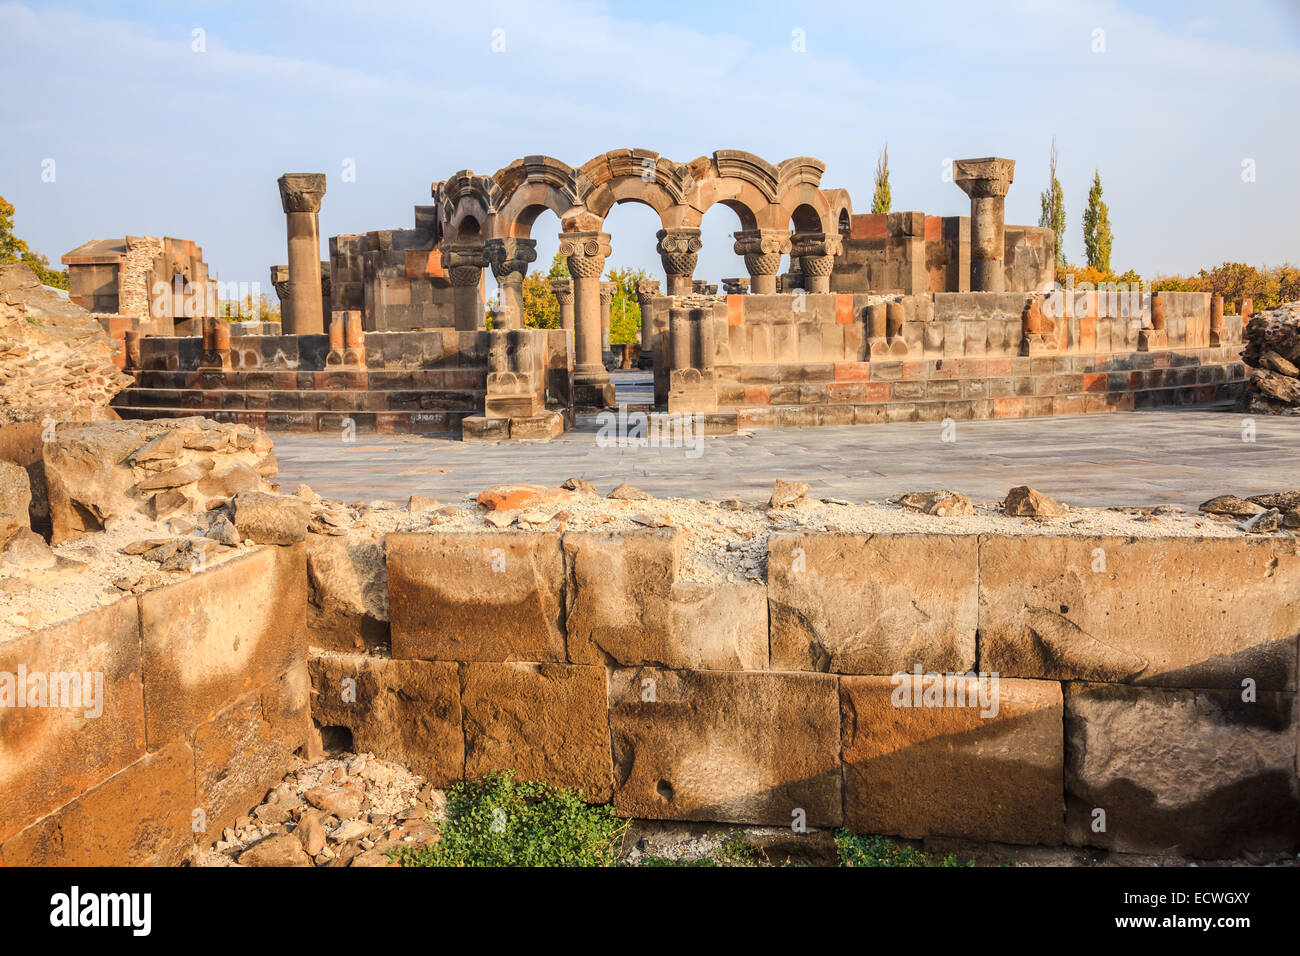 The view of ruins Zvartnots Cathedral in Echmiadzin, Armenia Stock Photo